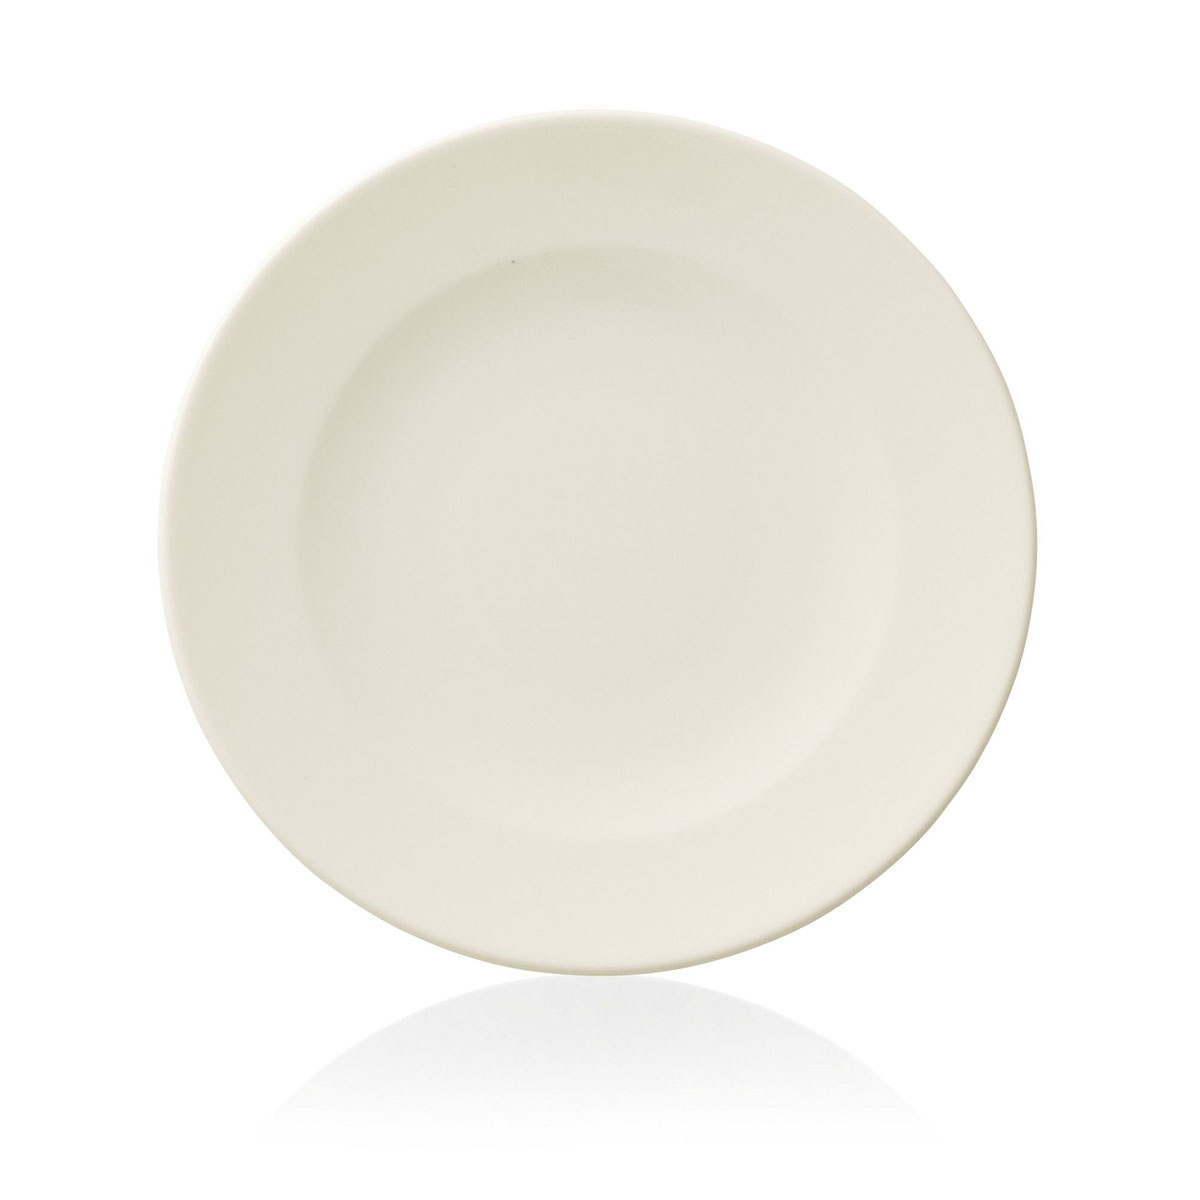 Villeroy and Boch For Me Bread and Butter Plate